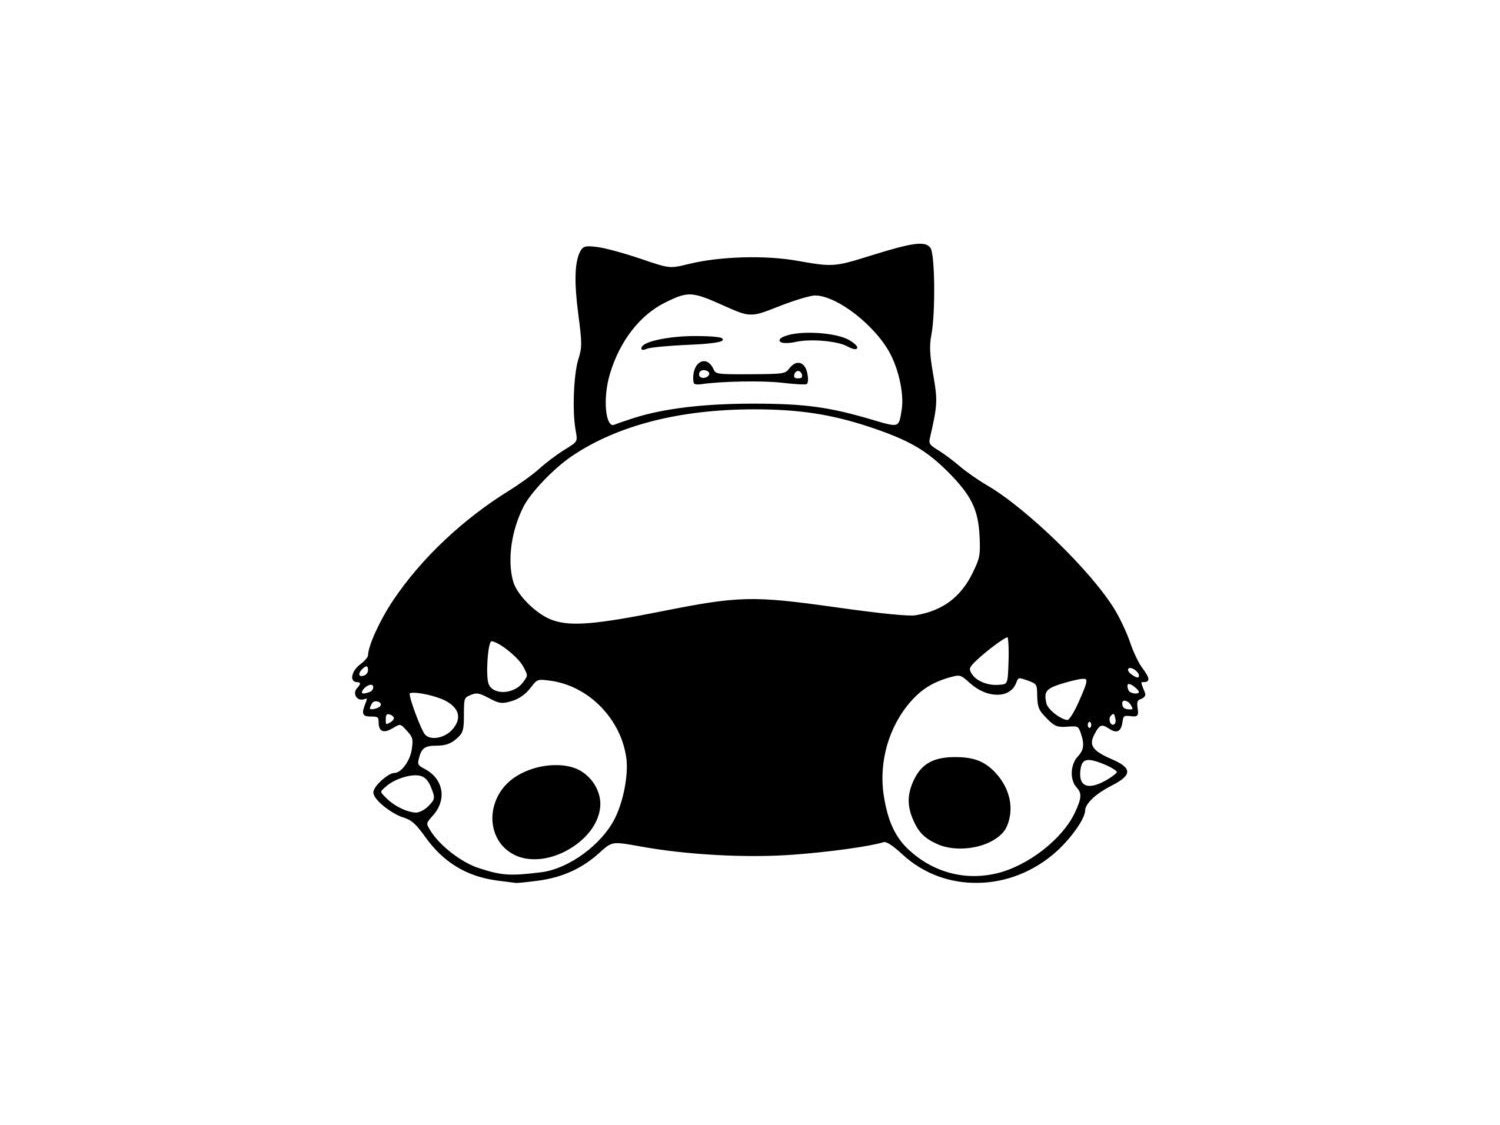 Download Snorlax Pokemon SVG File! from ClaireBsCaboodles on Etsy ...